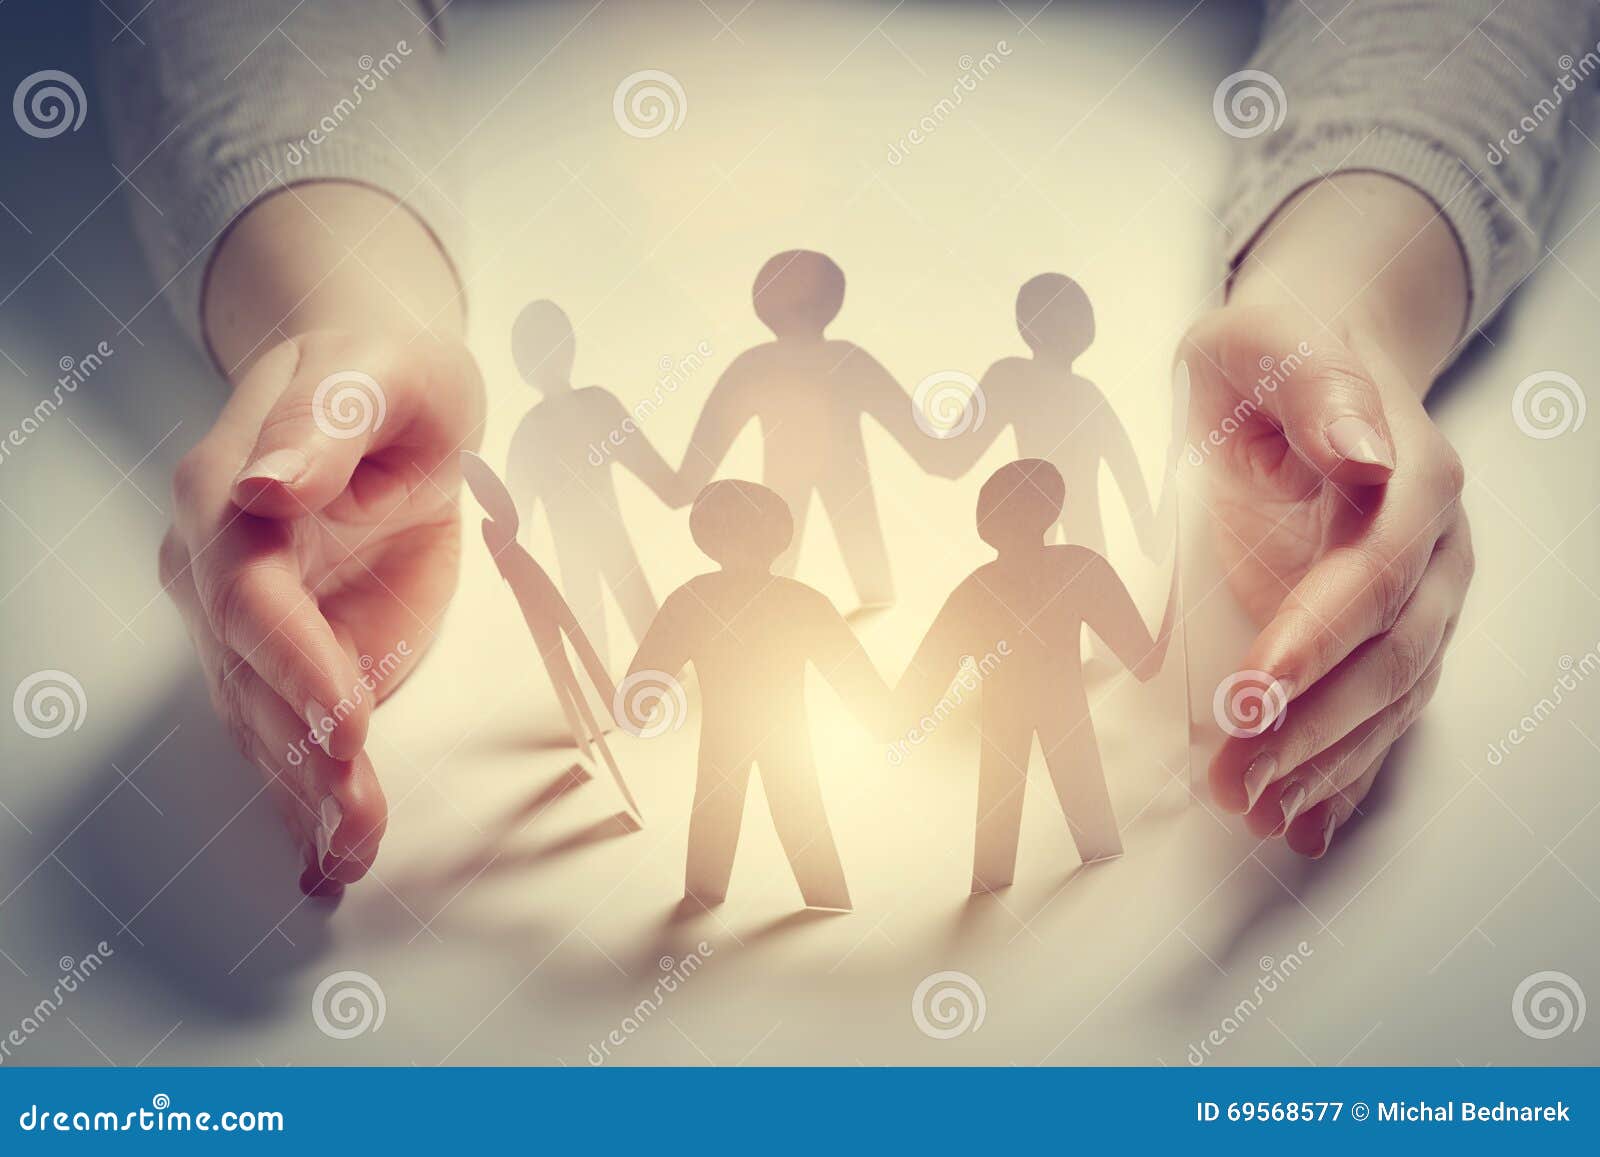 paper people surrounded by hands in gesture of protection. concept of insurance